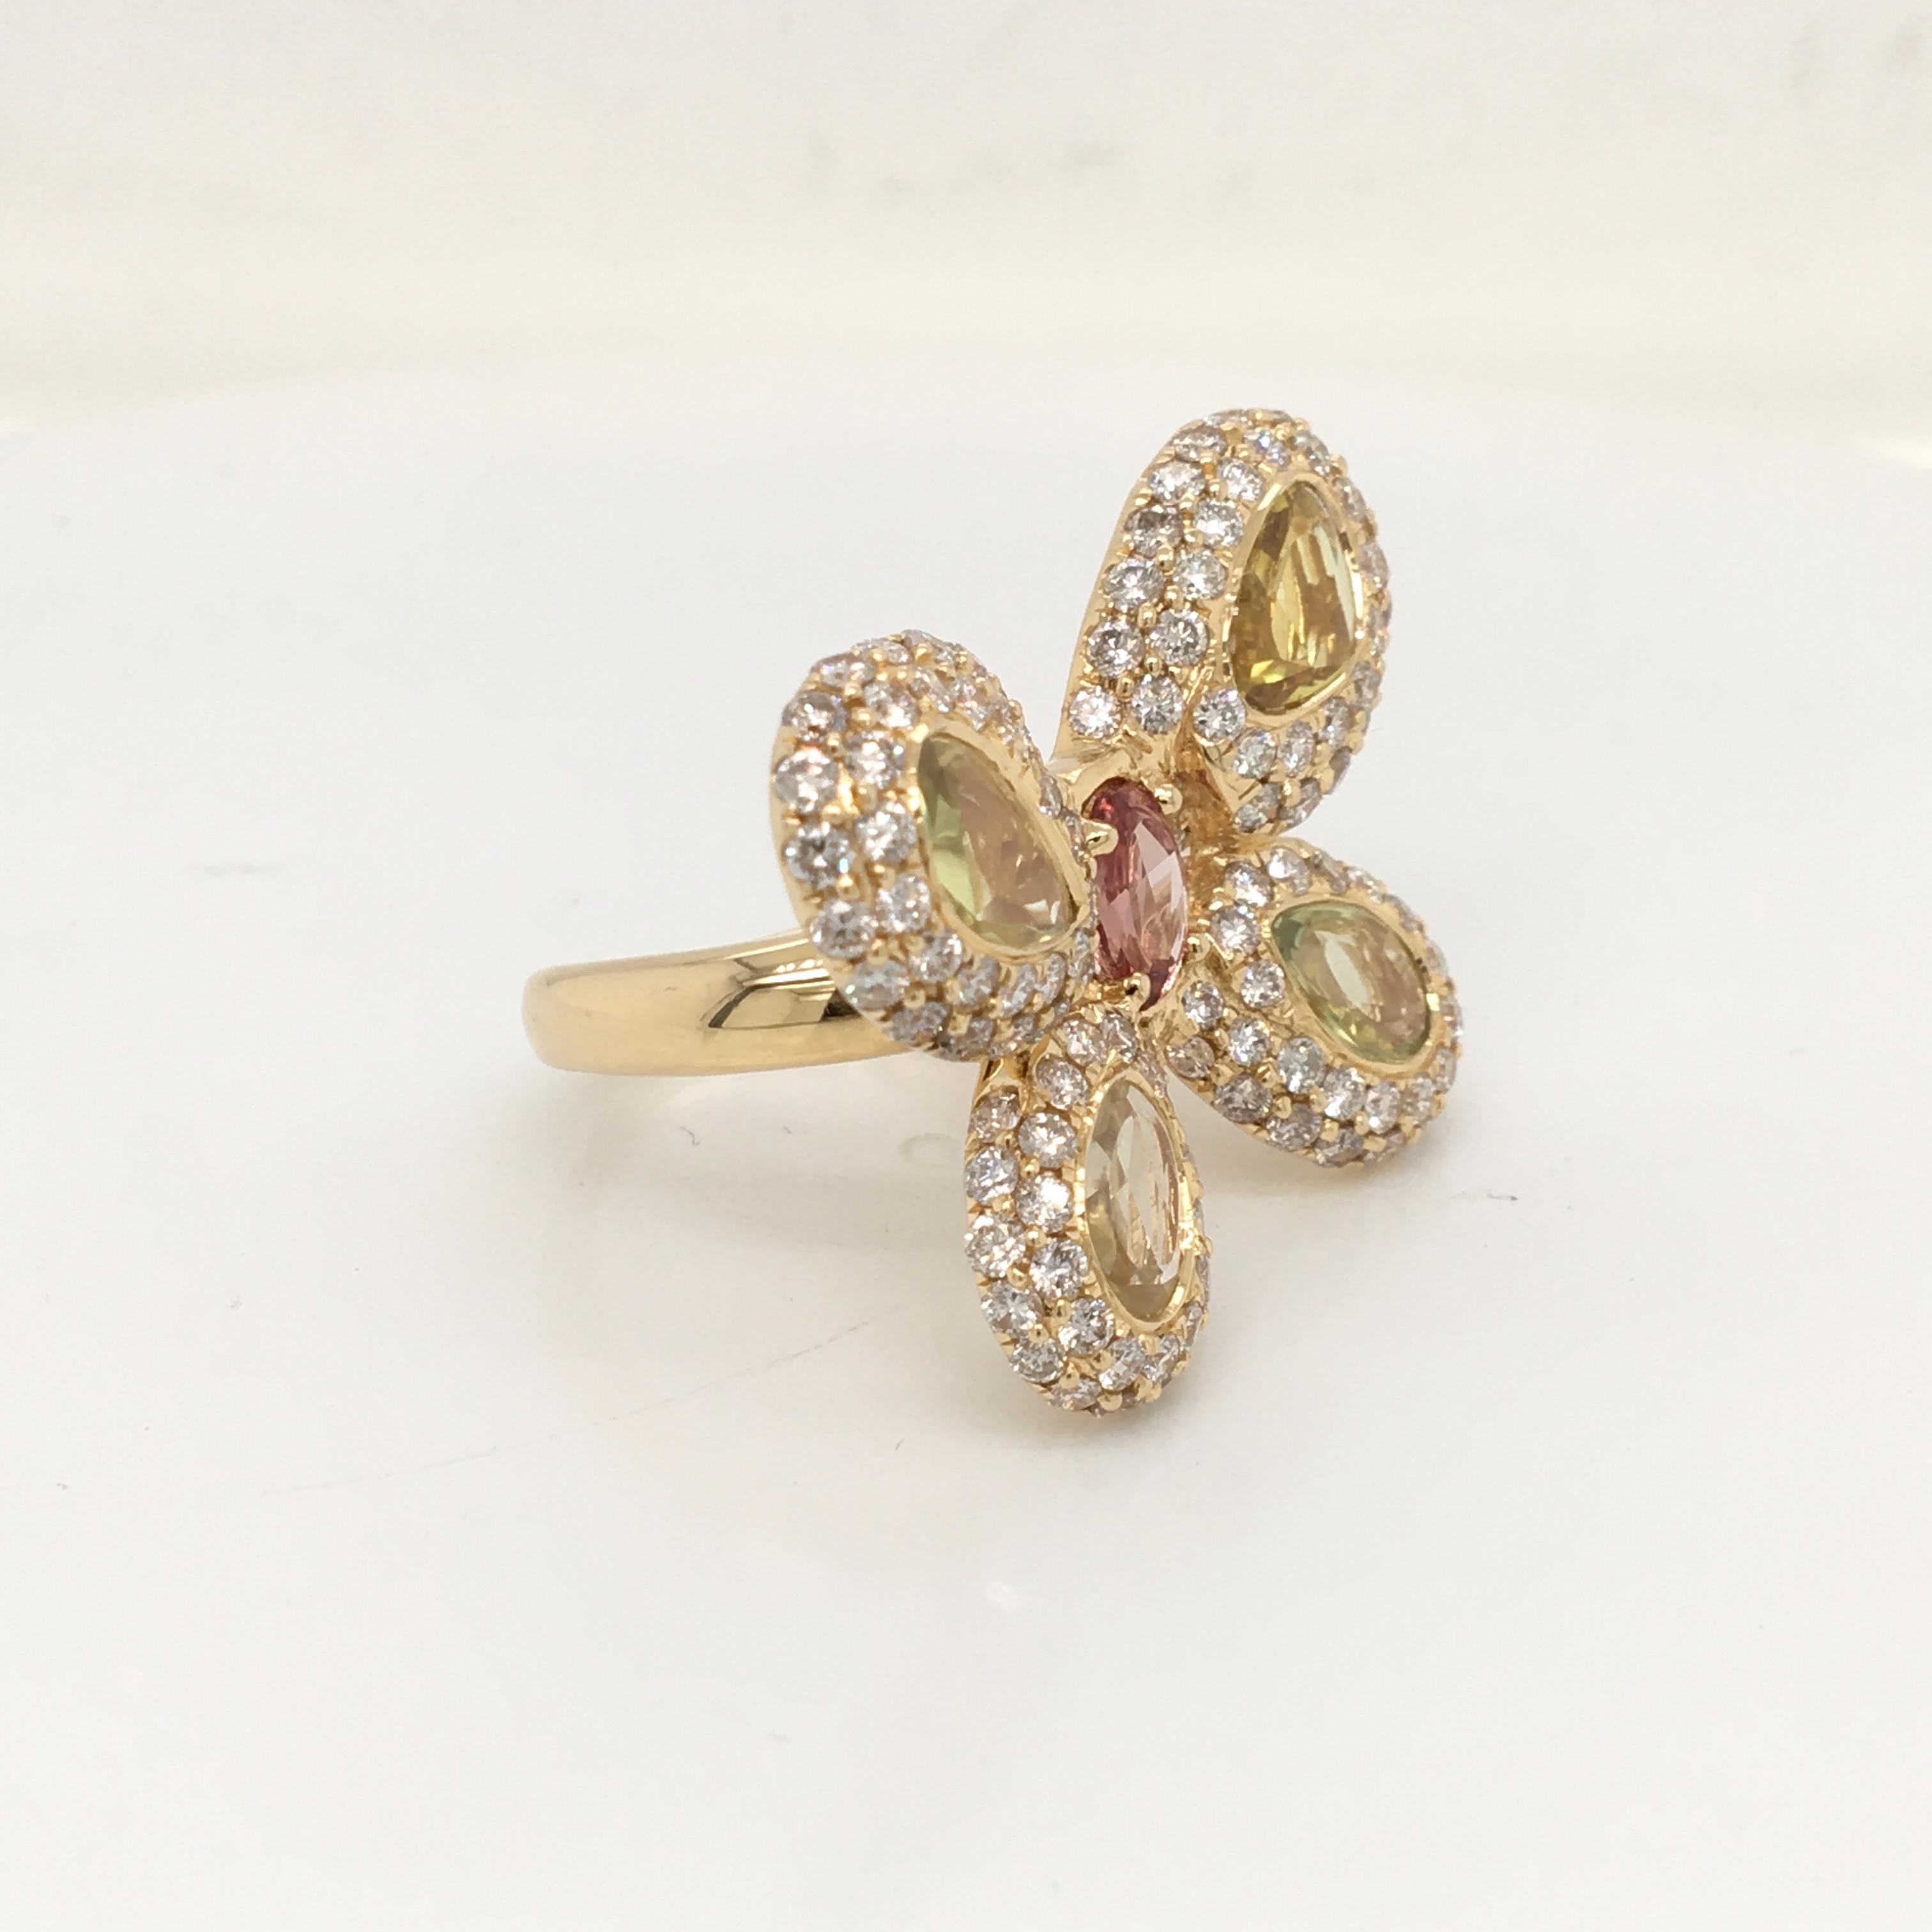 18 Karat yellow gold ring in a butterfly design, set with 2.83 carats of diamonds round cut  color  G  clarity  VS and 4 carats of  multishape yellow sapphires Made in Italy comes in a Box,
finger size 6,75 US size (finger size is adjustable in our